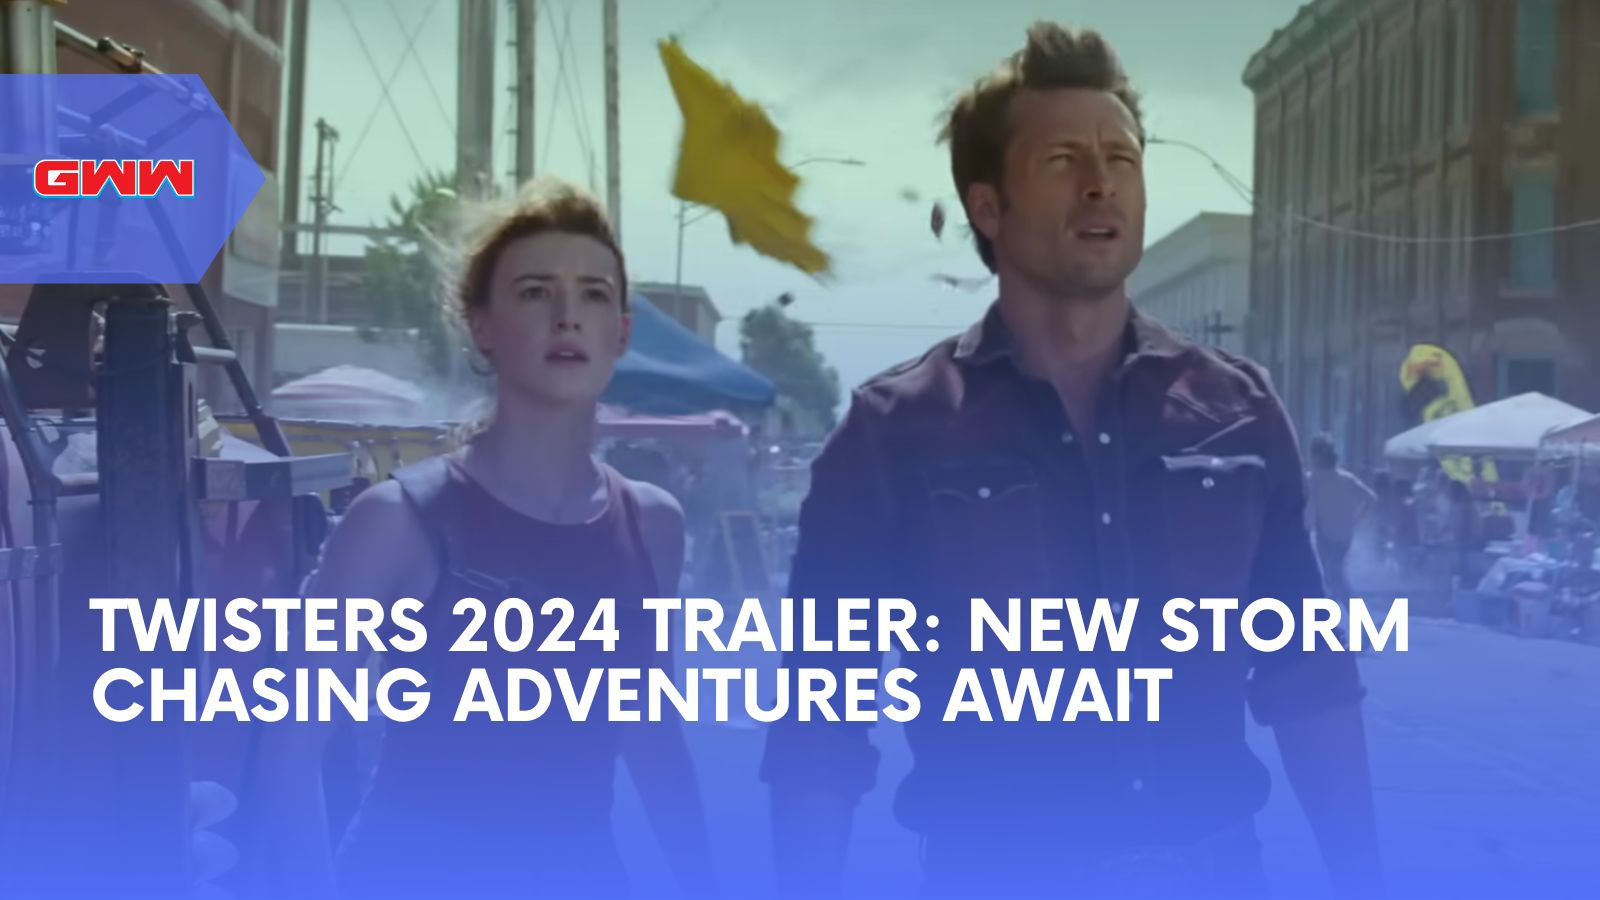 Twisters 2024 Trailer: New Storm Chasing Adventures Await